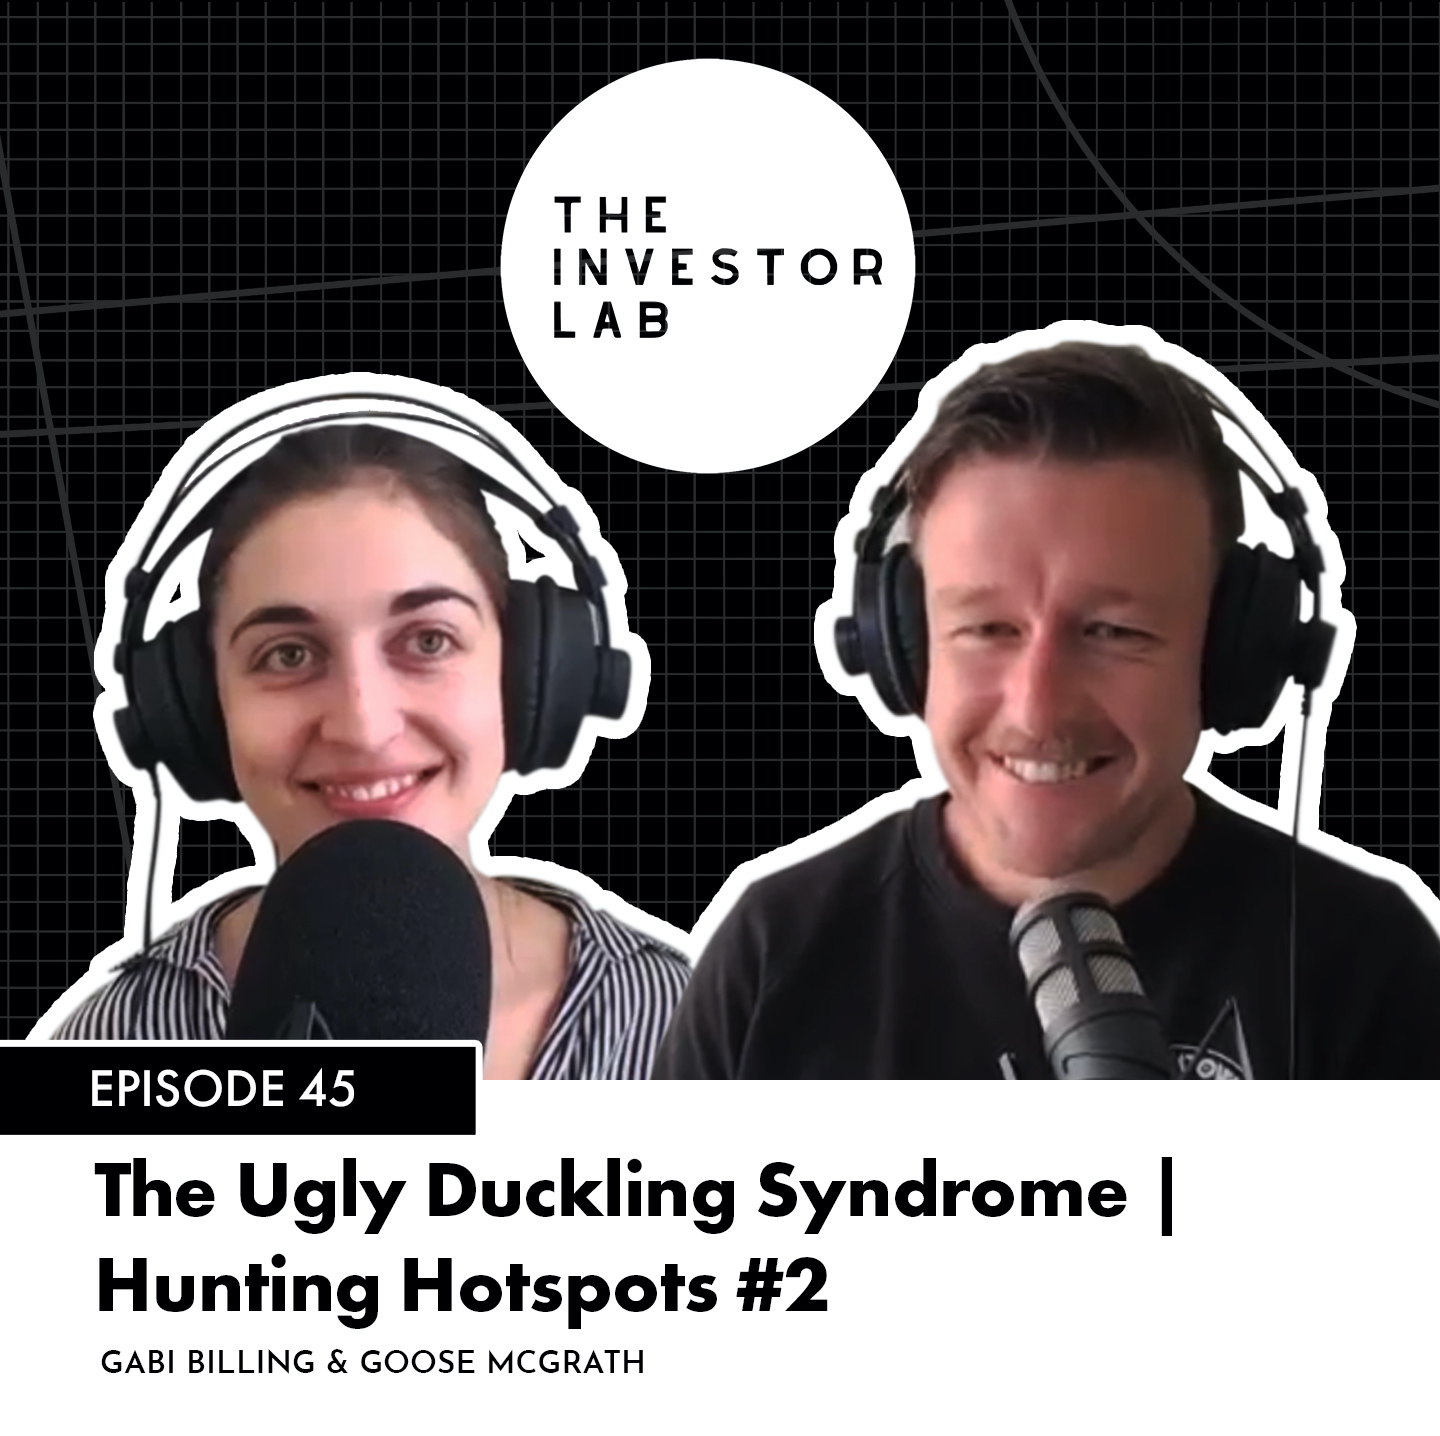 The Ugly Duckling Syndrome I Hunting Hotspots #2